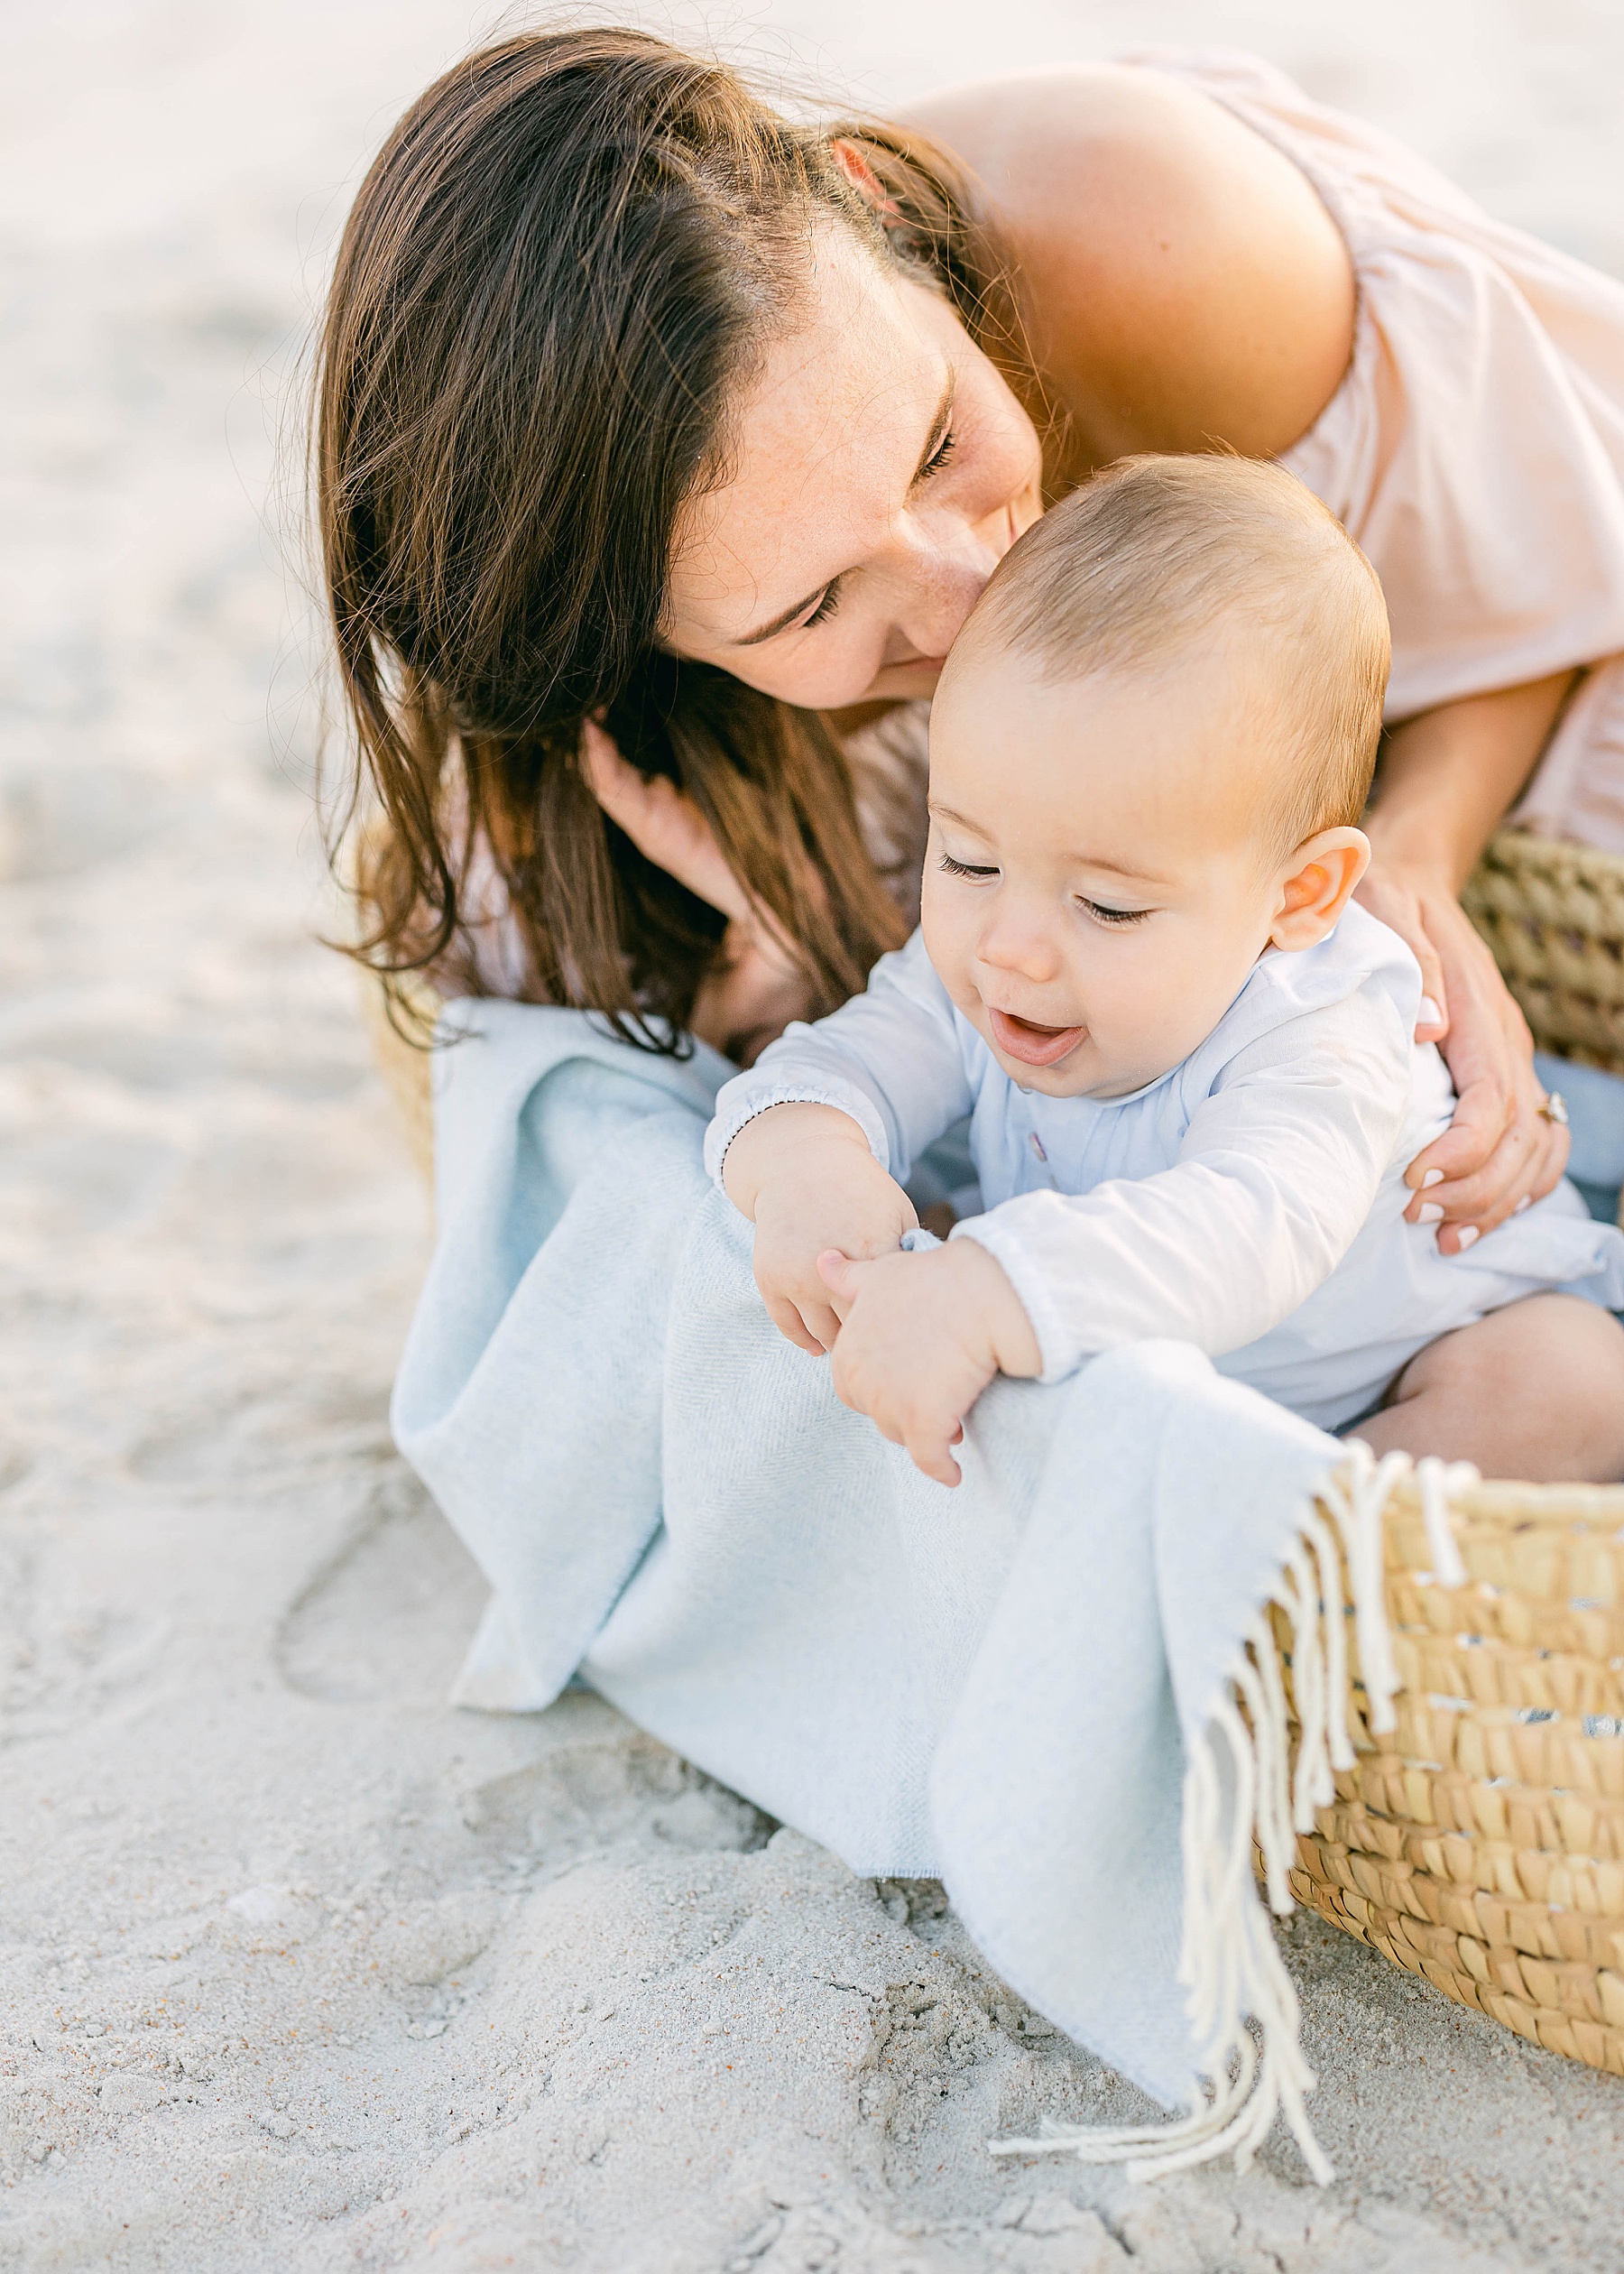 woman smiling kissing baby in basket on the beach sand